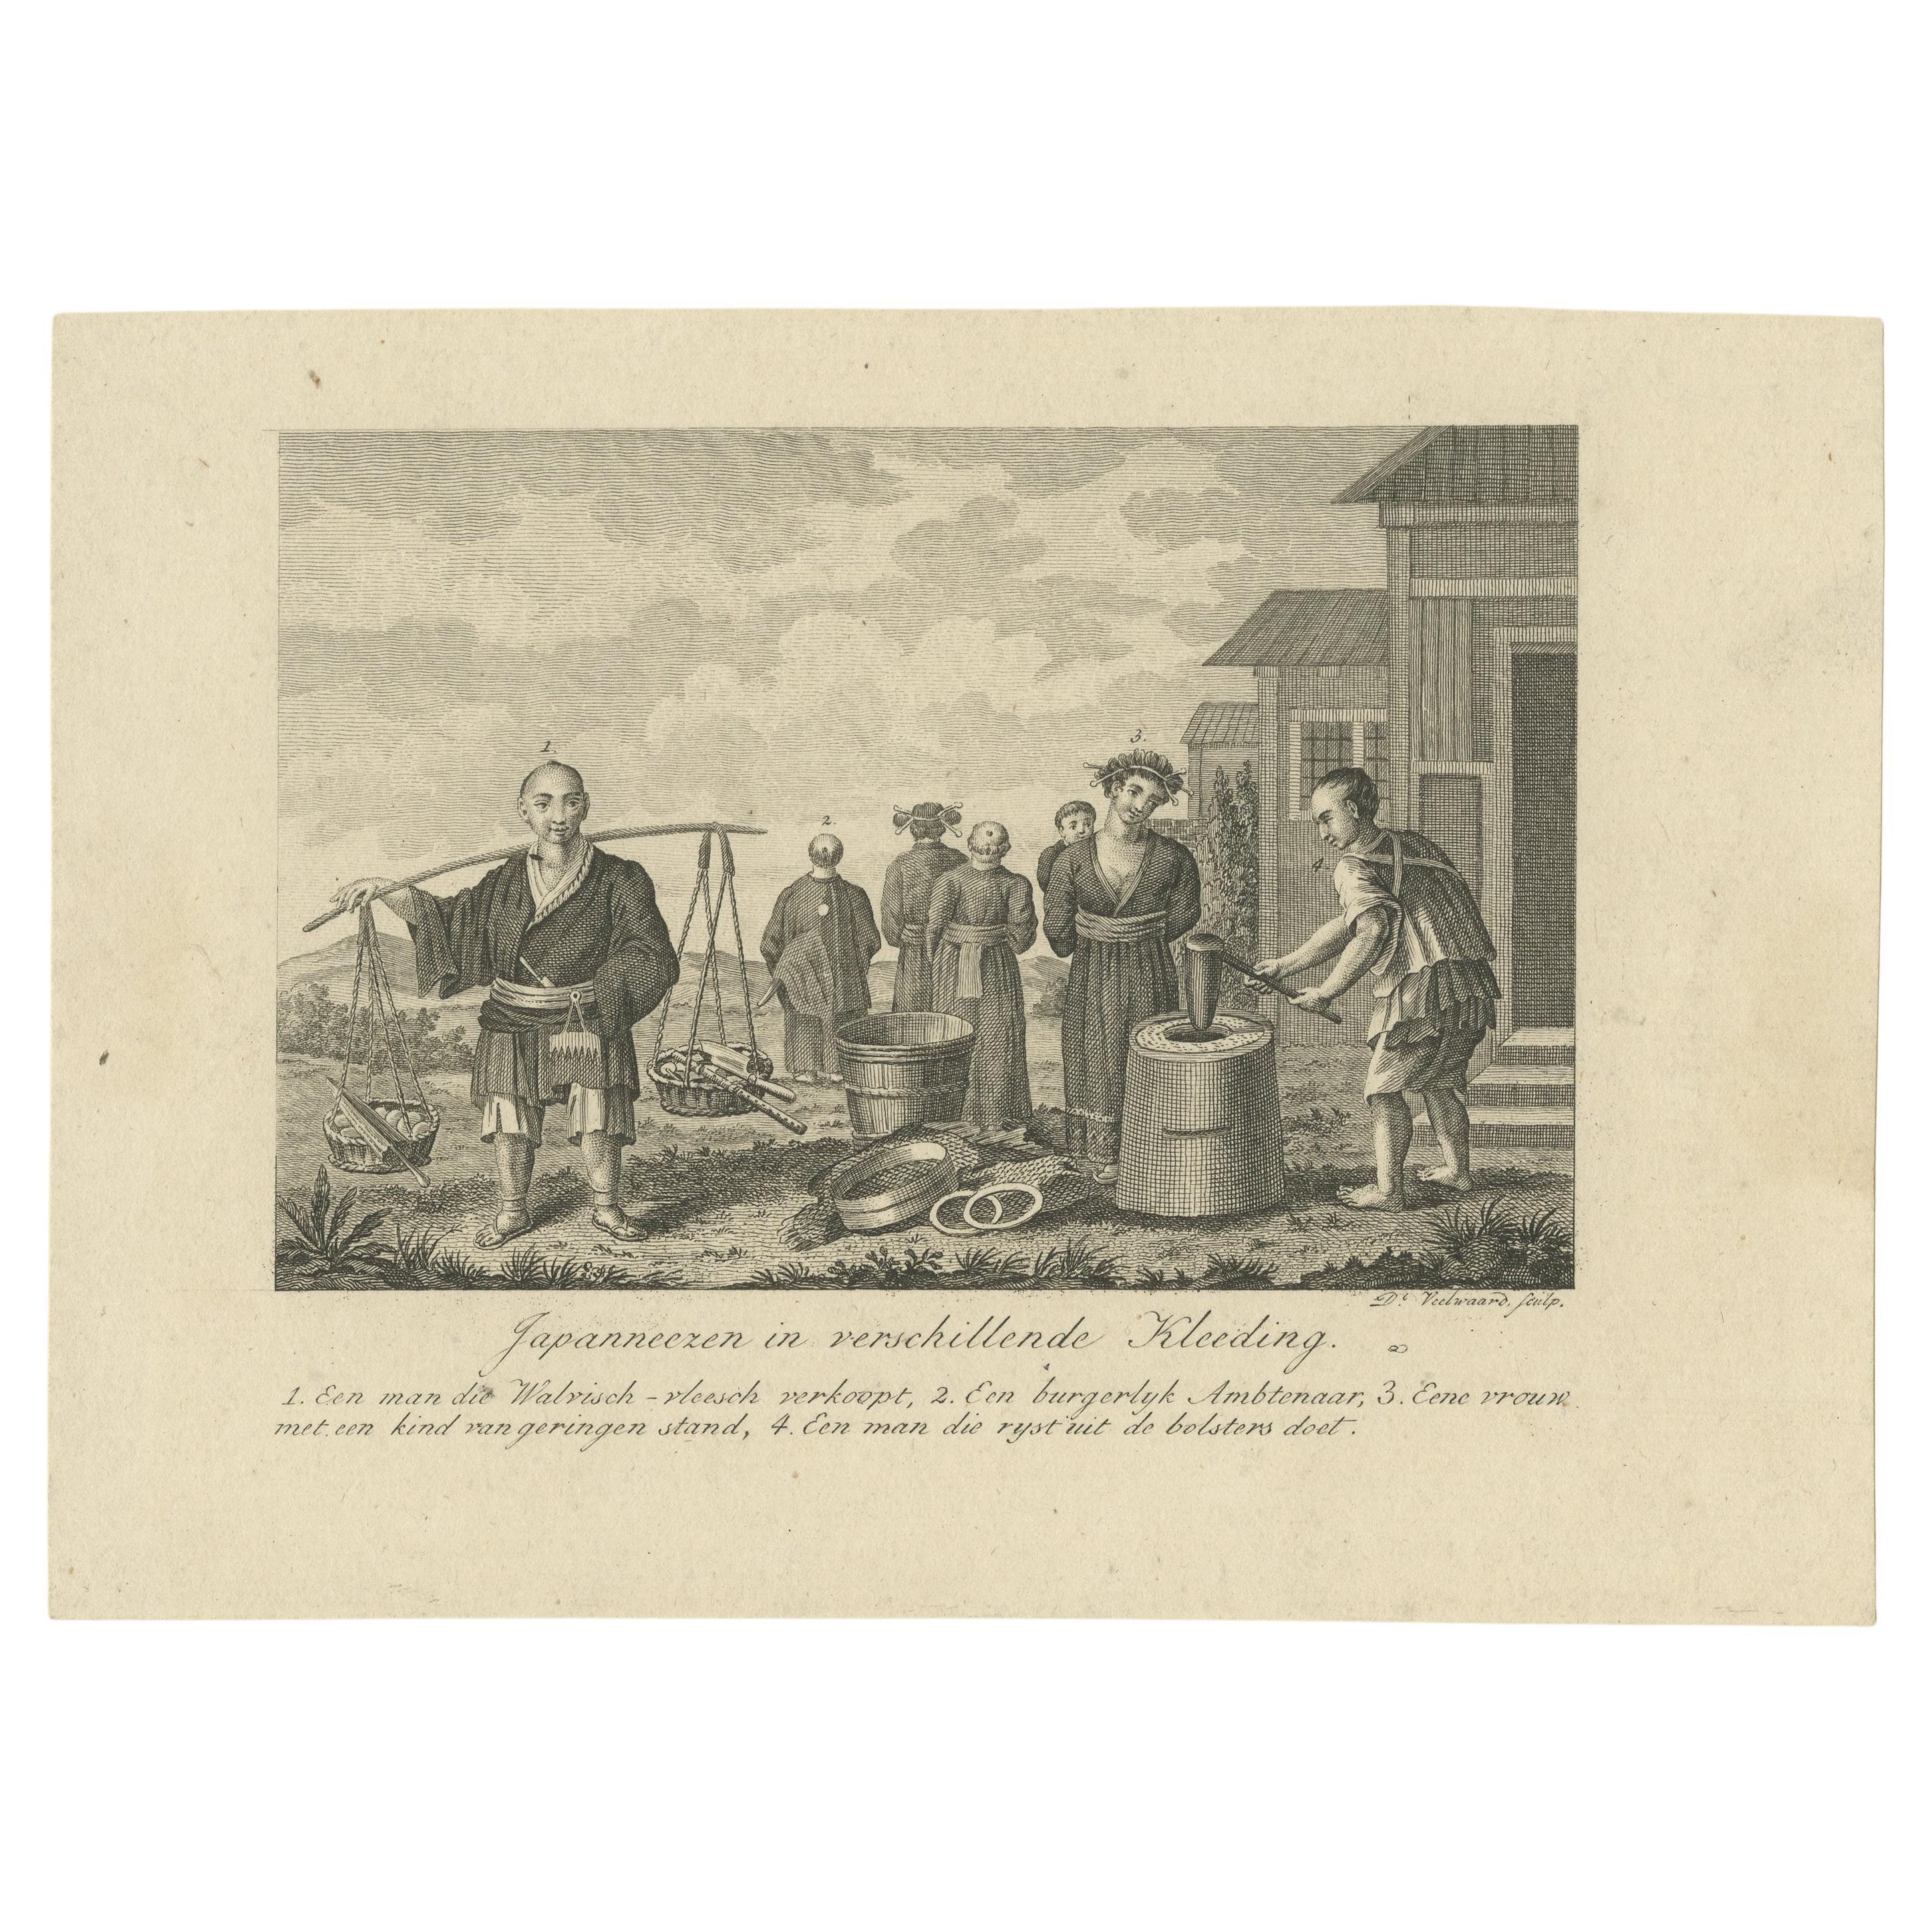 Antique print titled 'Japanneezen in verschillende Kleeding'. This prints shows Japanese people and their costumes. Engraved by D. Veelwaard, circa 1820.